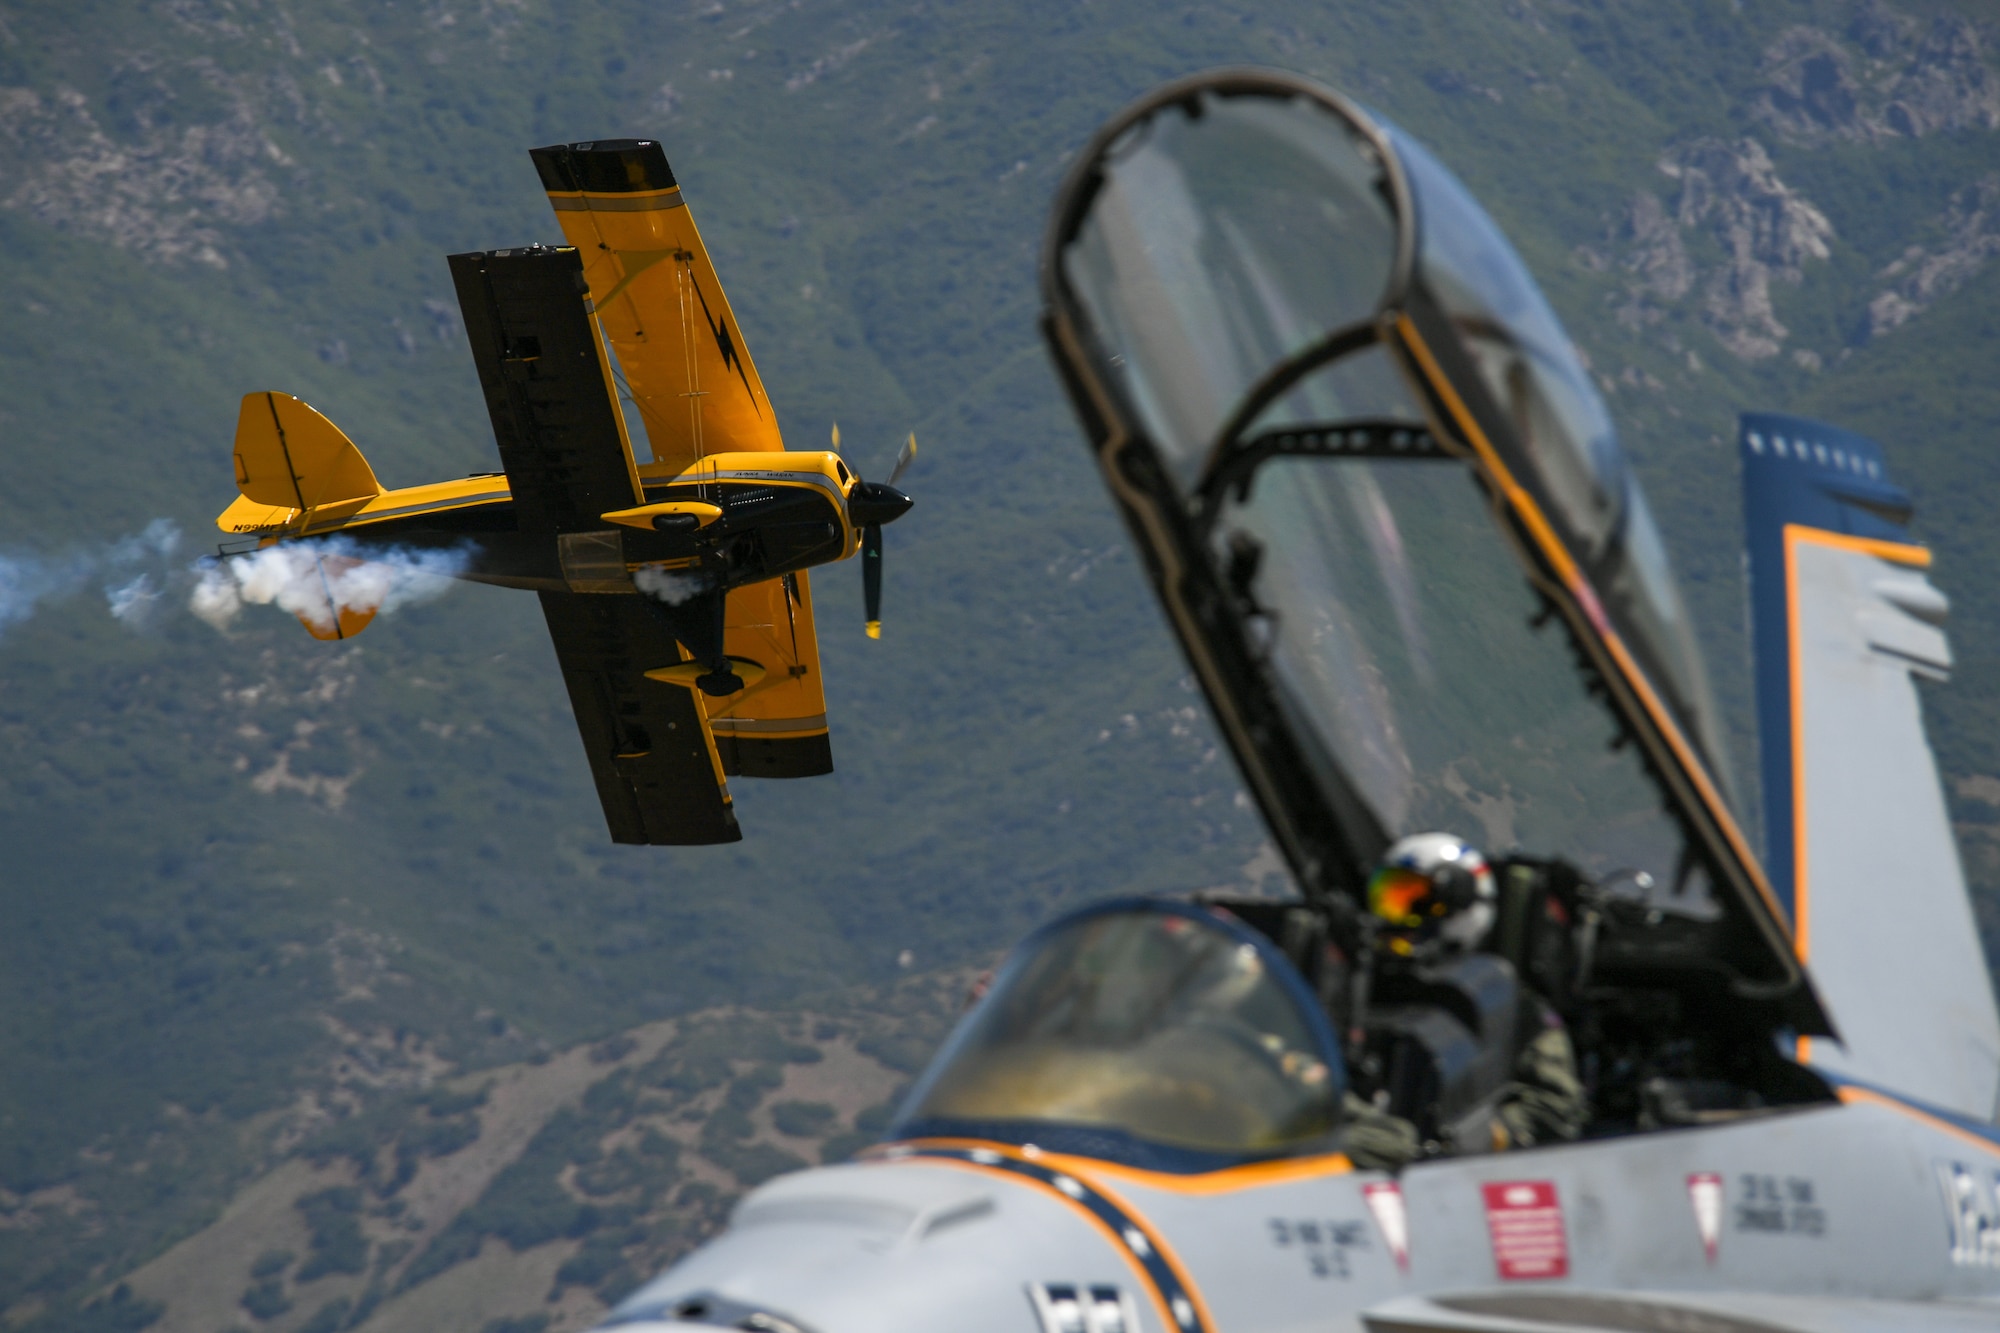 A yellow Pitts S2S flies in the background with while a pilot sits in the cockpit of a U.S. Navy F-18 fighter aircraft in the foreground.